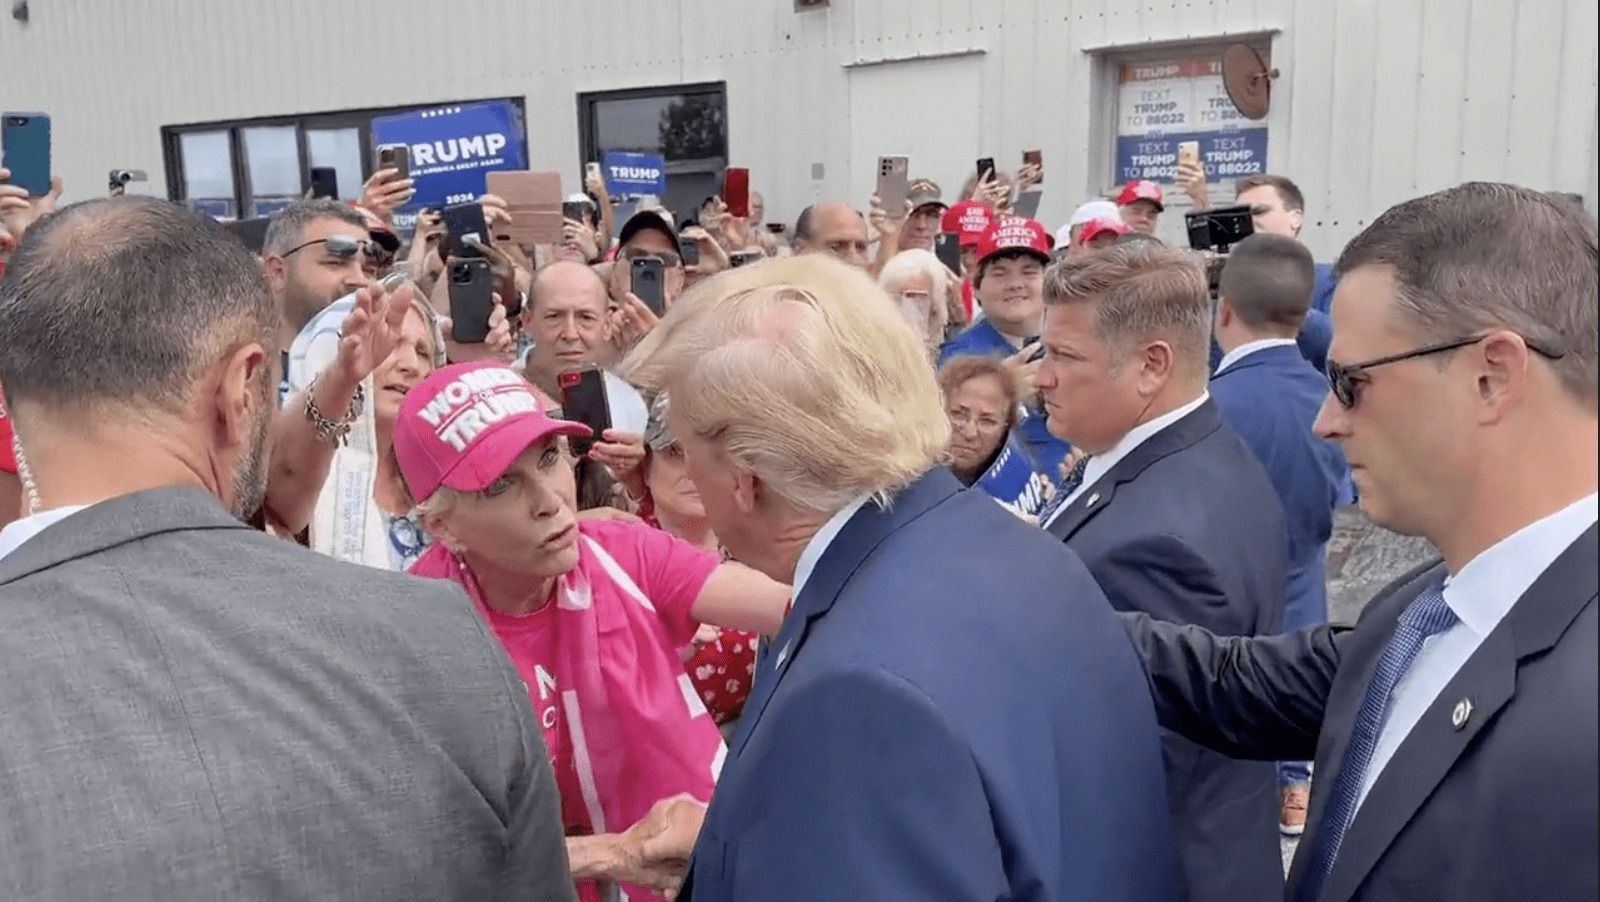 WATCH: President Trump Stops To Let Woman In Crowd Pray Over Him | WLT Report